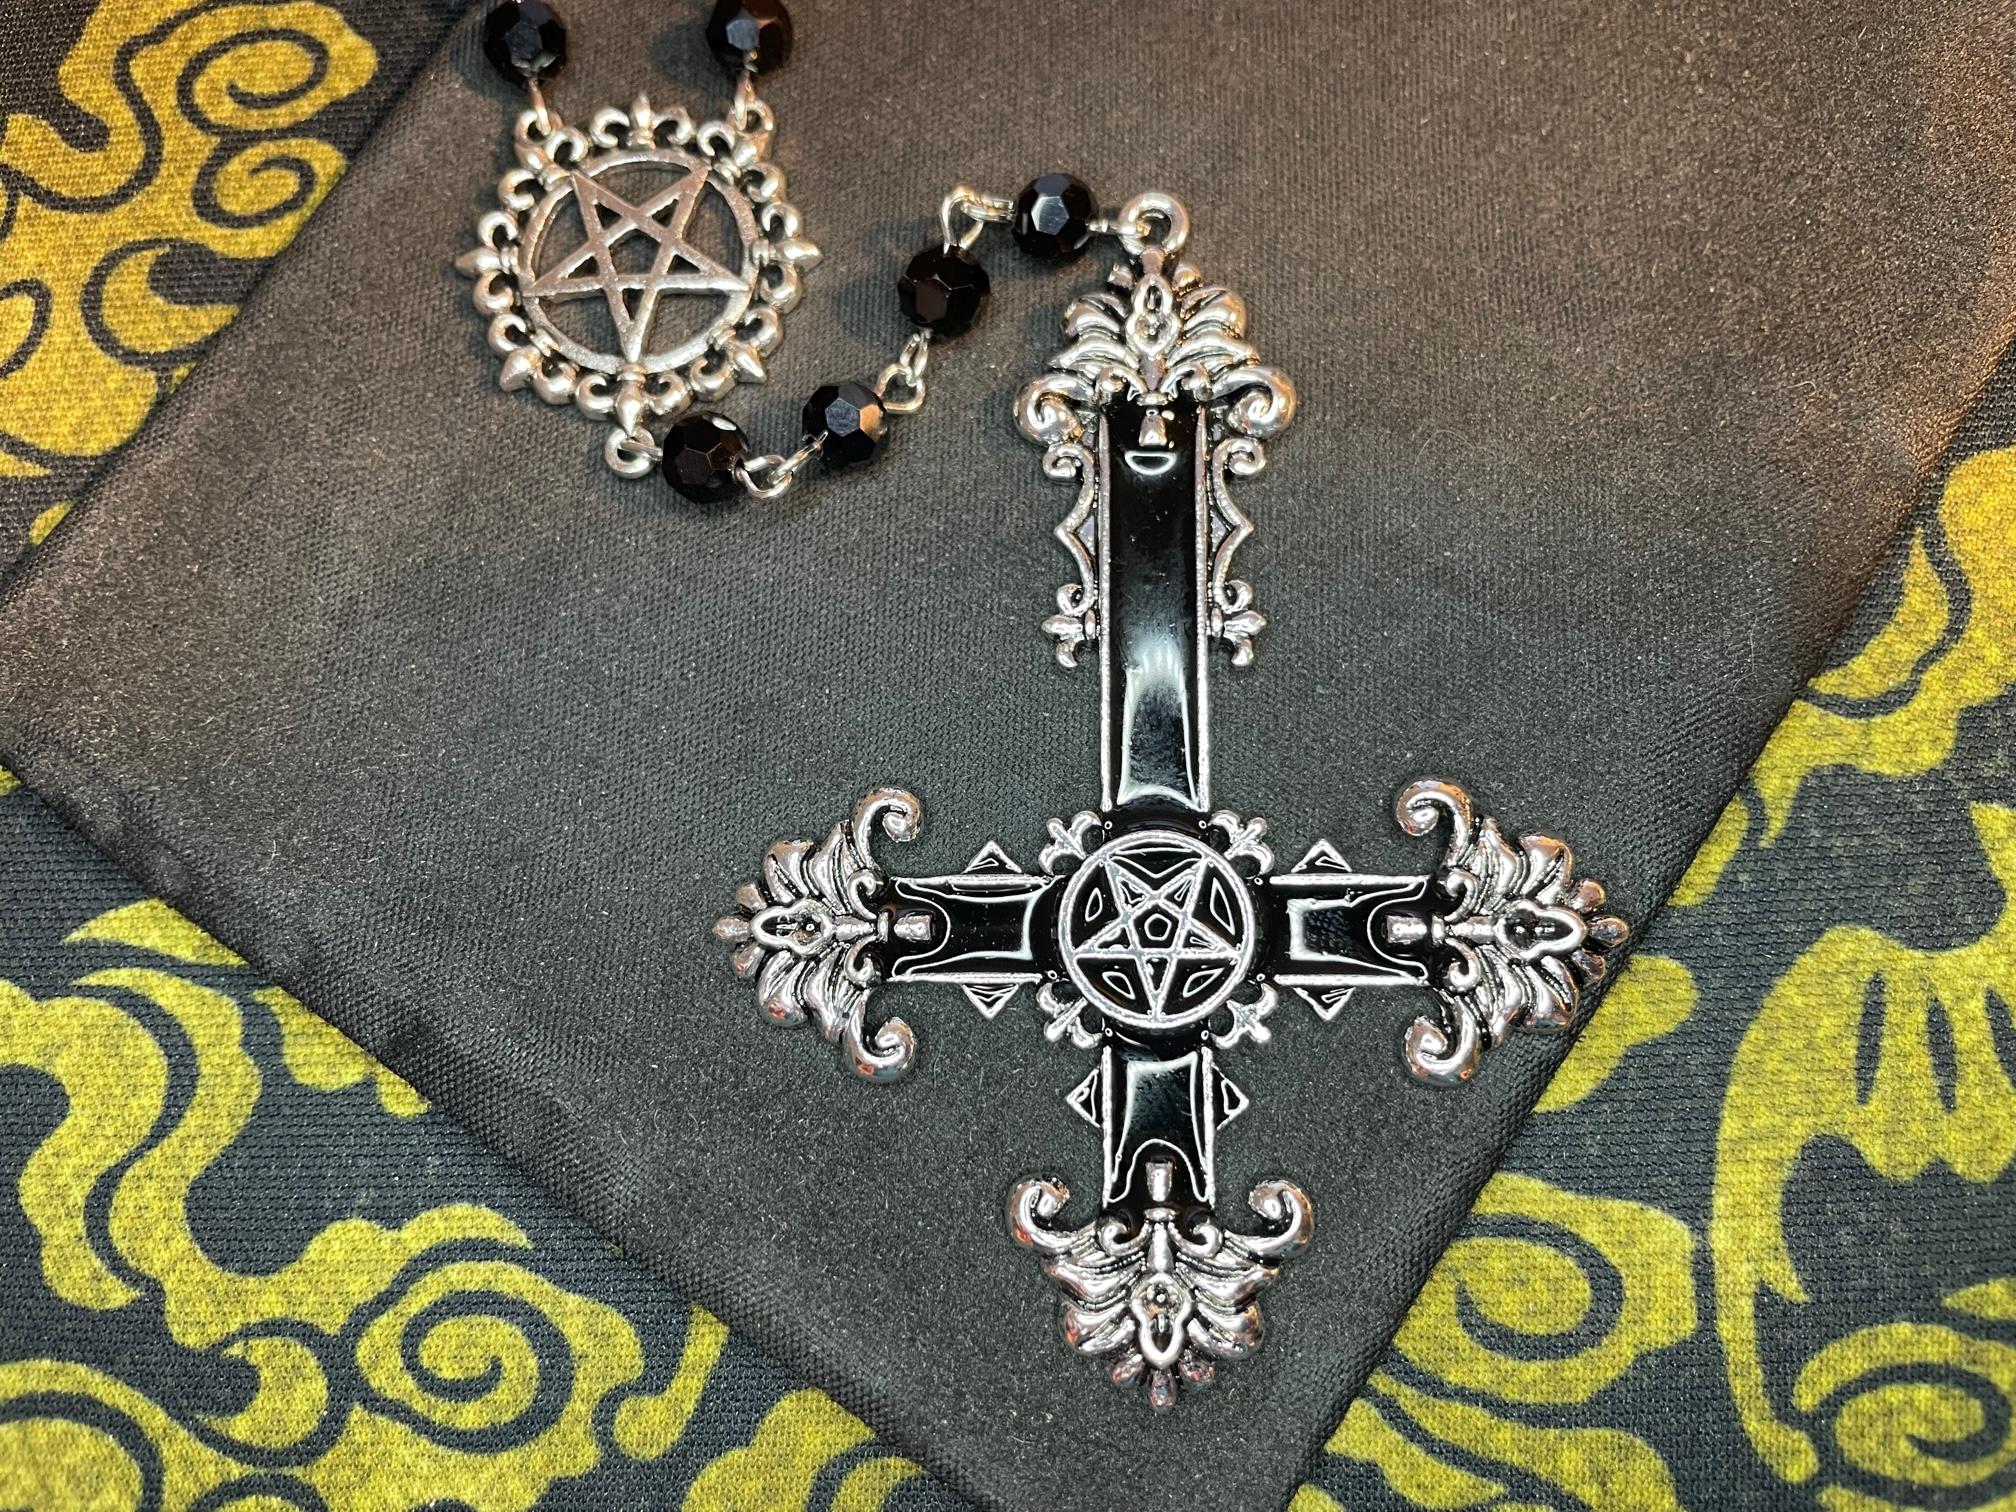 Satanic Rosary Inverted Pentagram Ornate Upside Down Cross 666 Pendant Witchcraft Black Magic Wiccan Occult Necklace Darkness Jewelry Silver Black